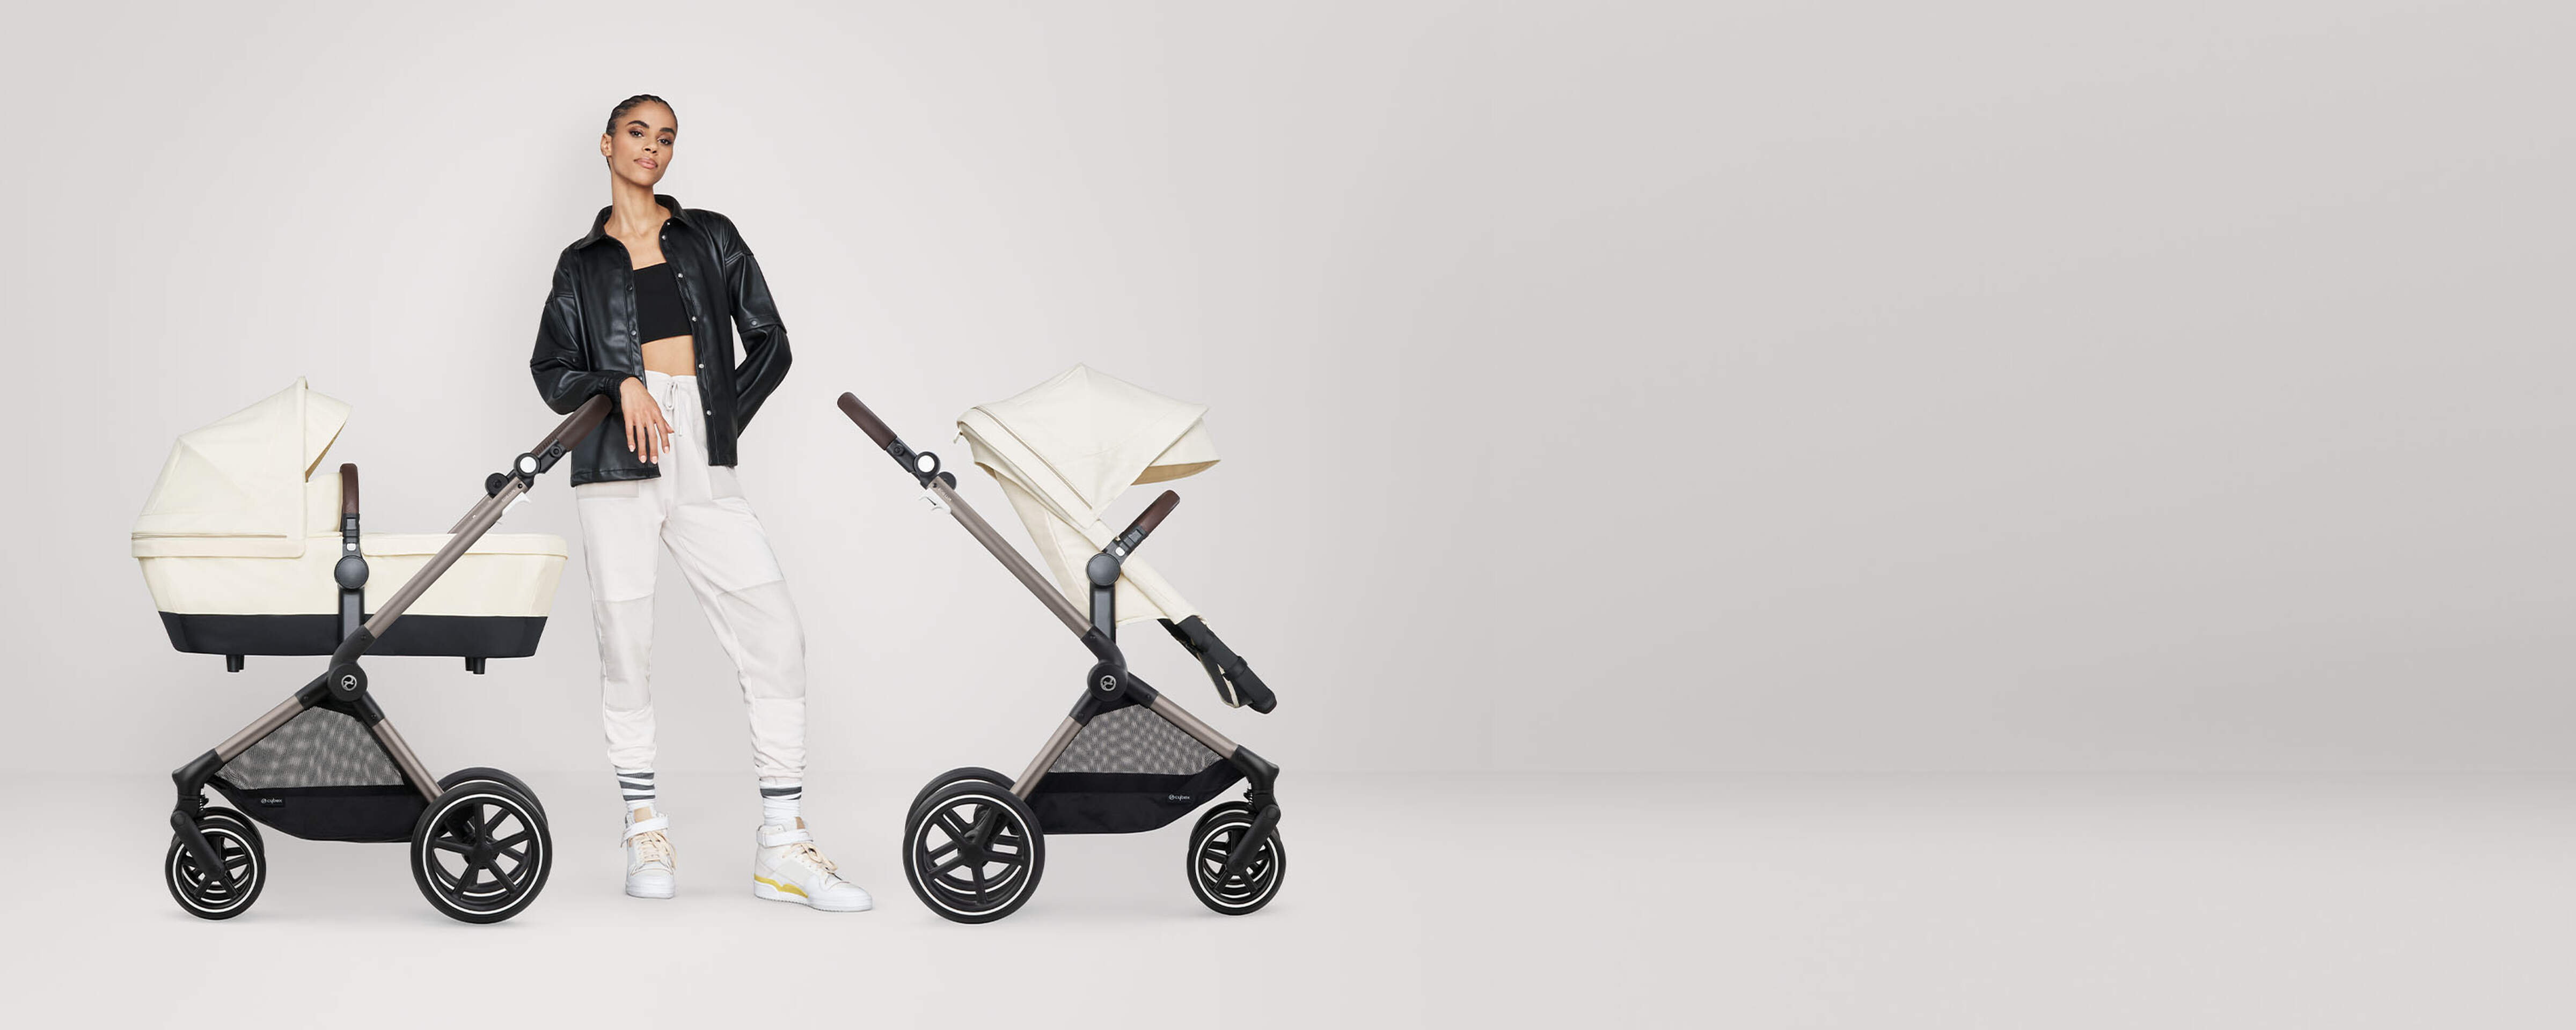 Order the Cybex Eos Lux Stroller - Silver Frame online - Baby Plus